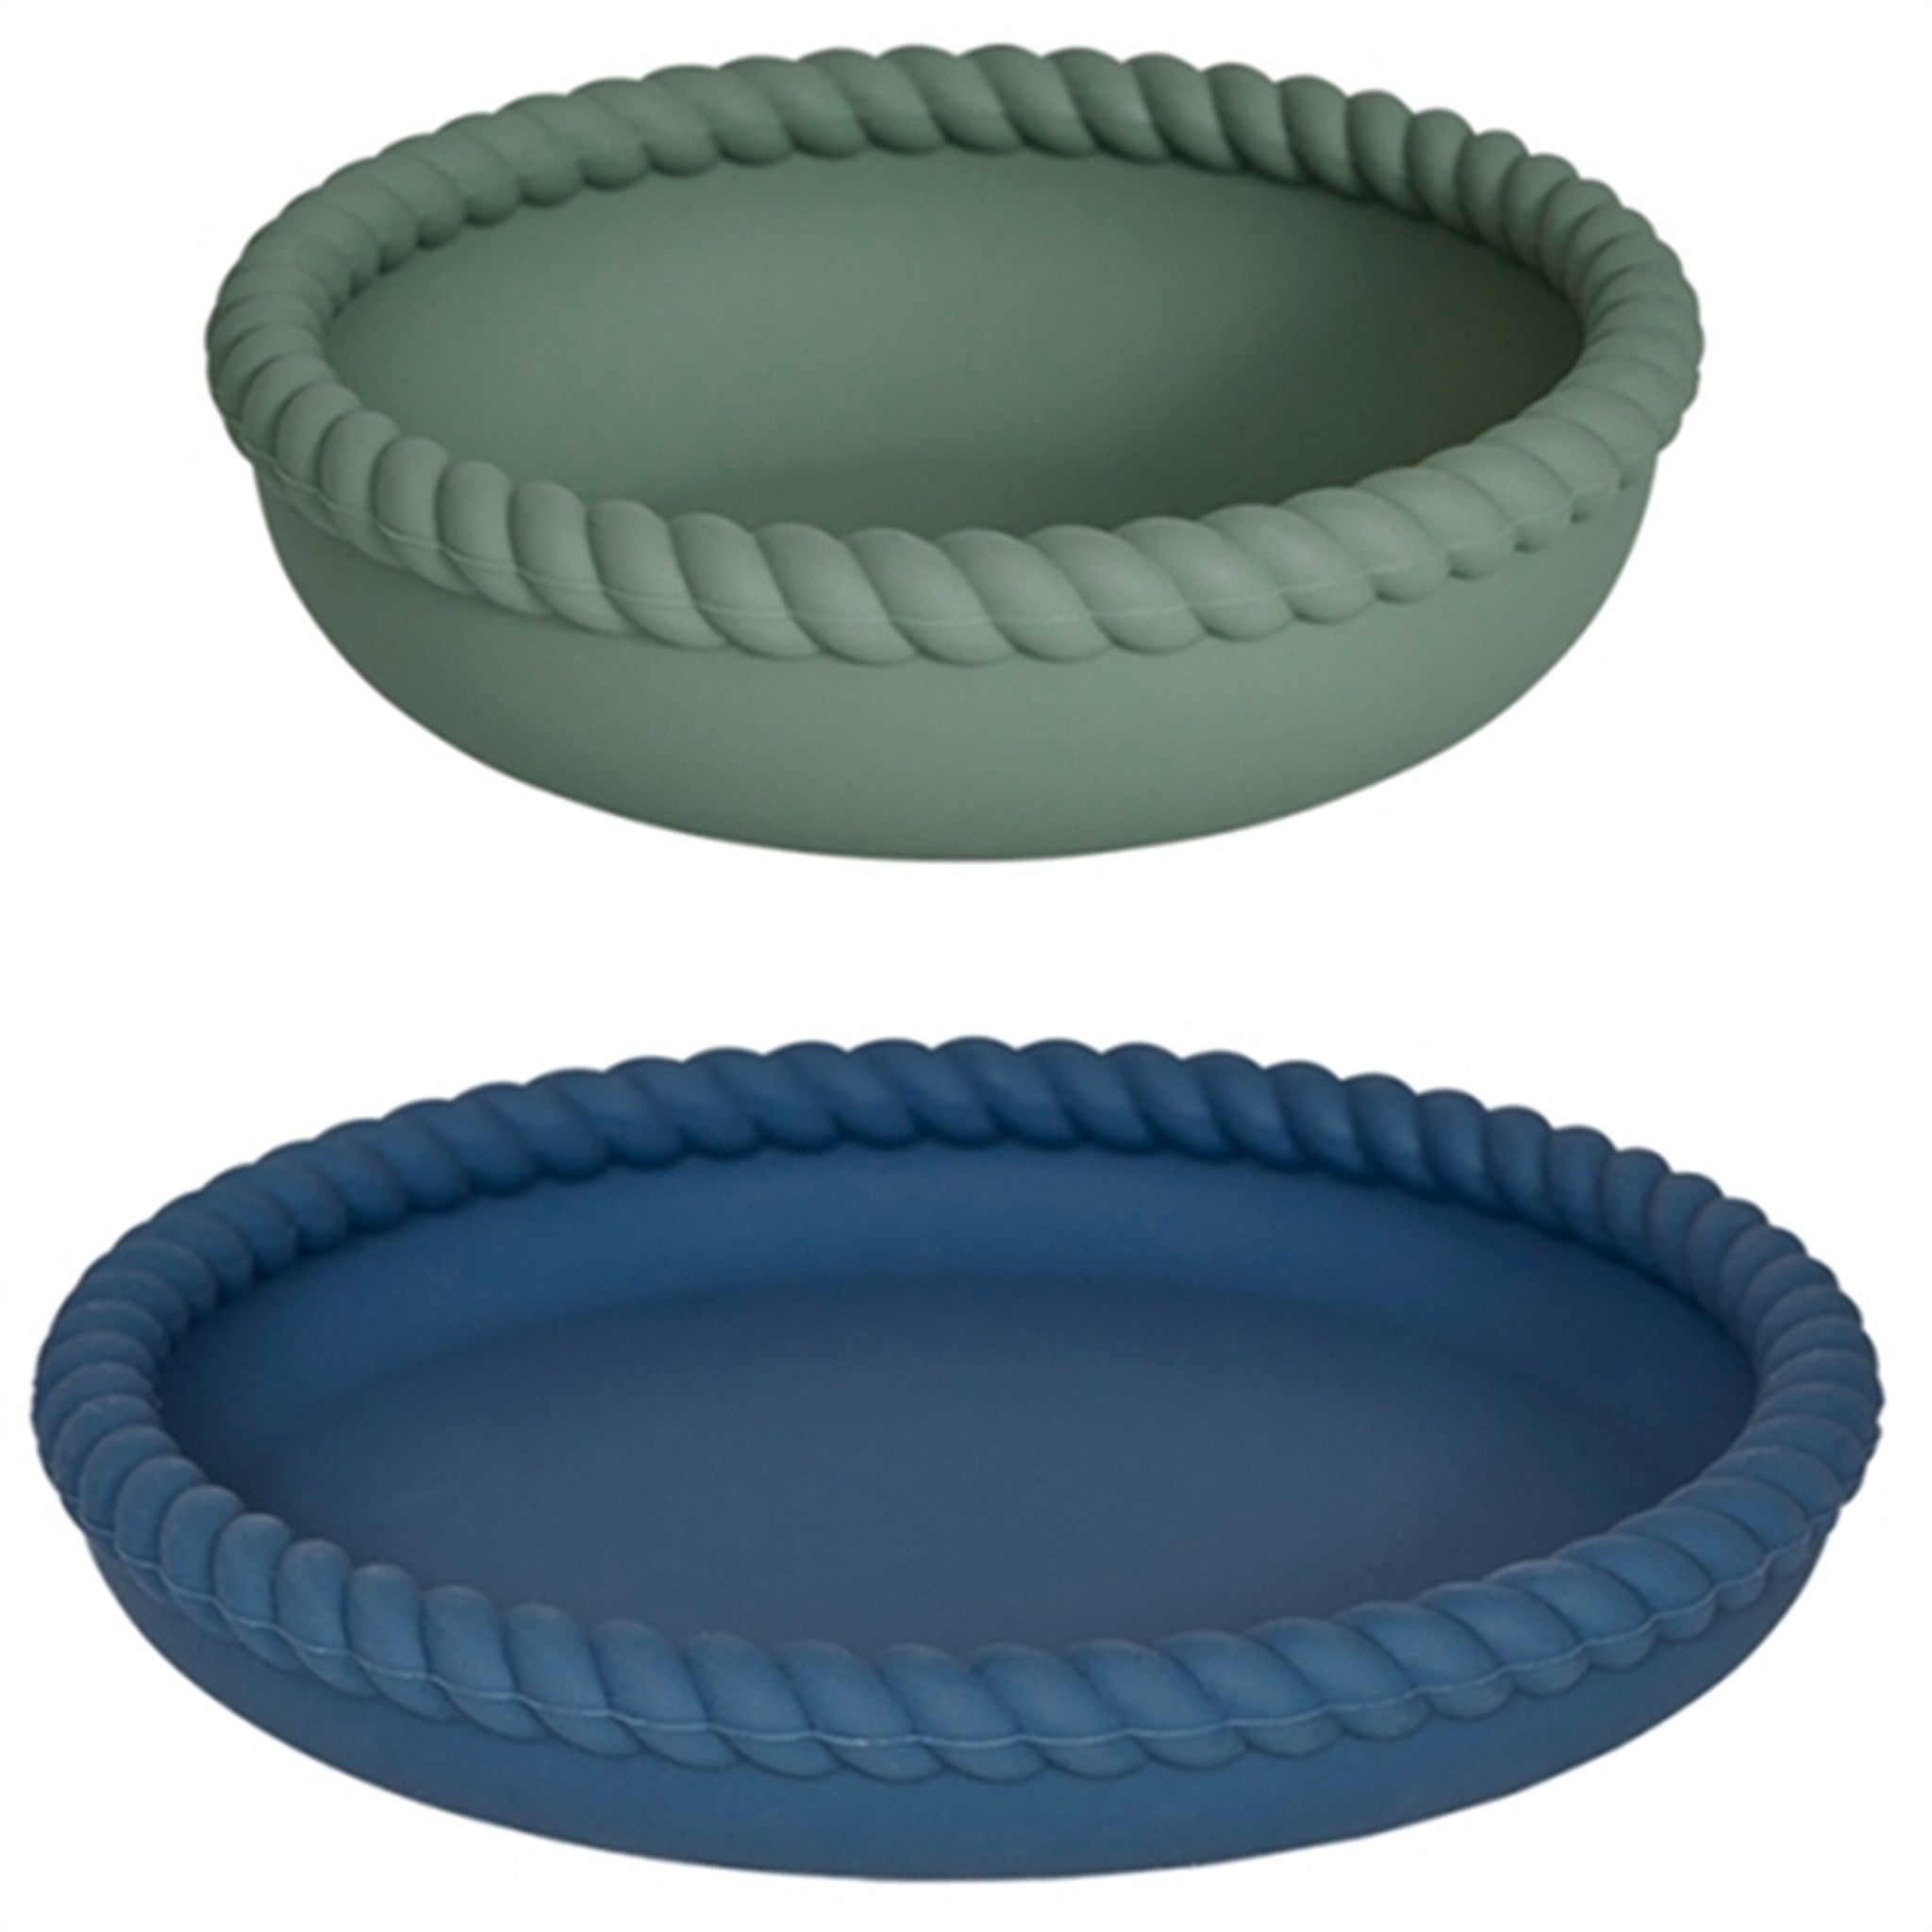 OYOY Mellow Bowl and Plate Blue/Olive